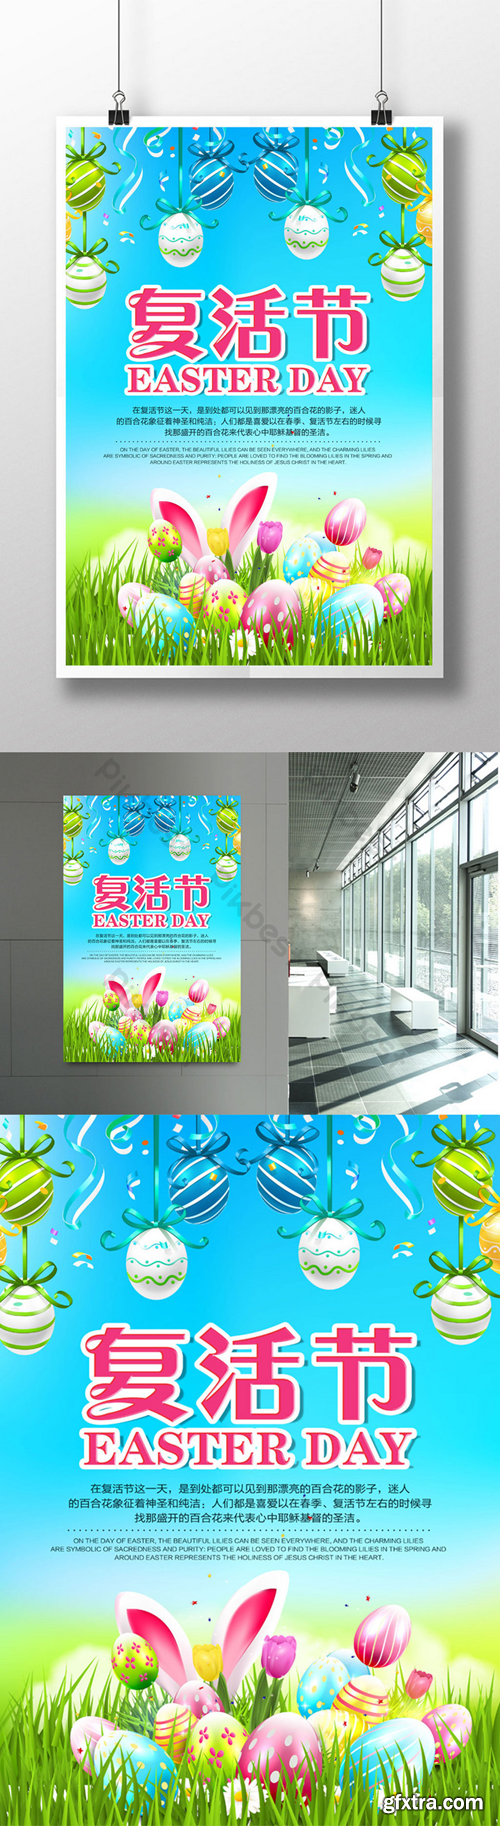 Easter holiday poster design Template PSD